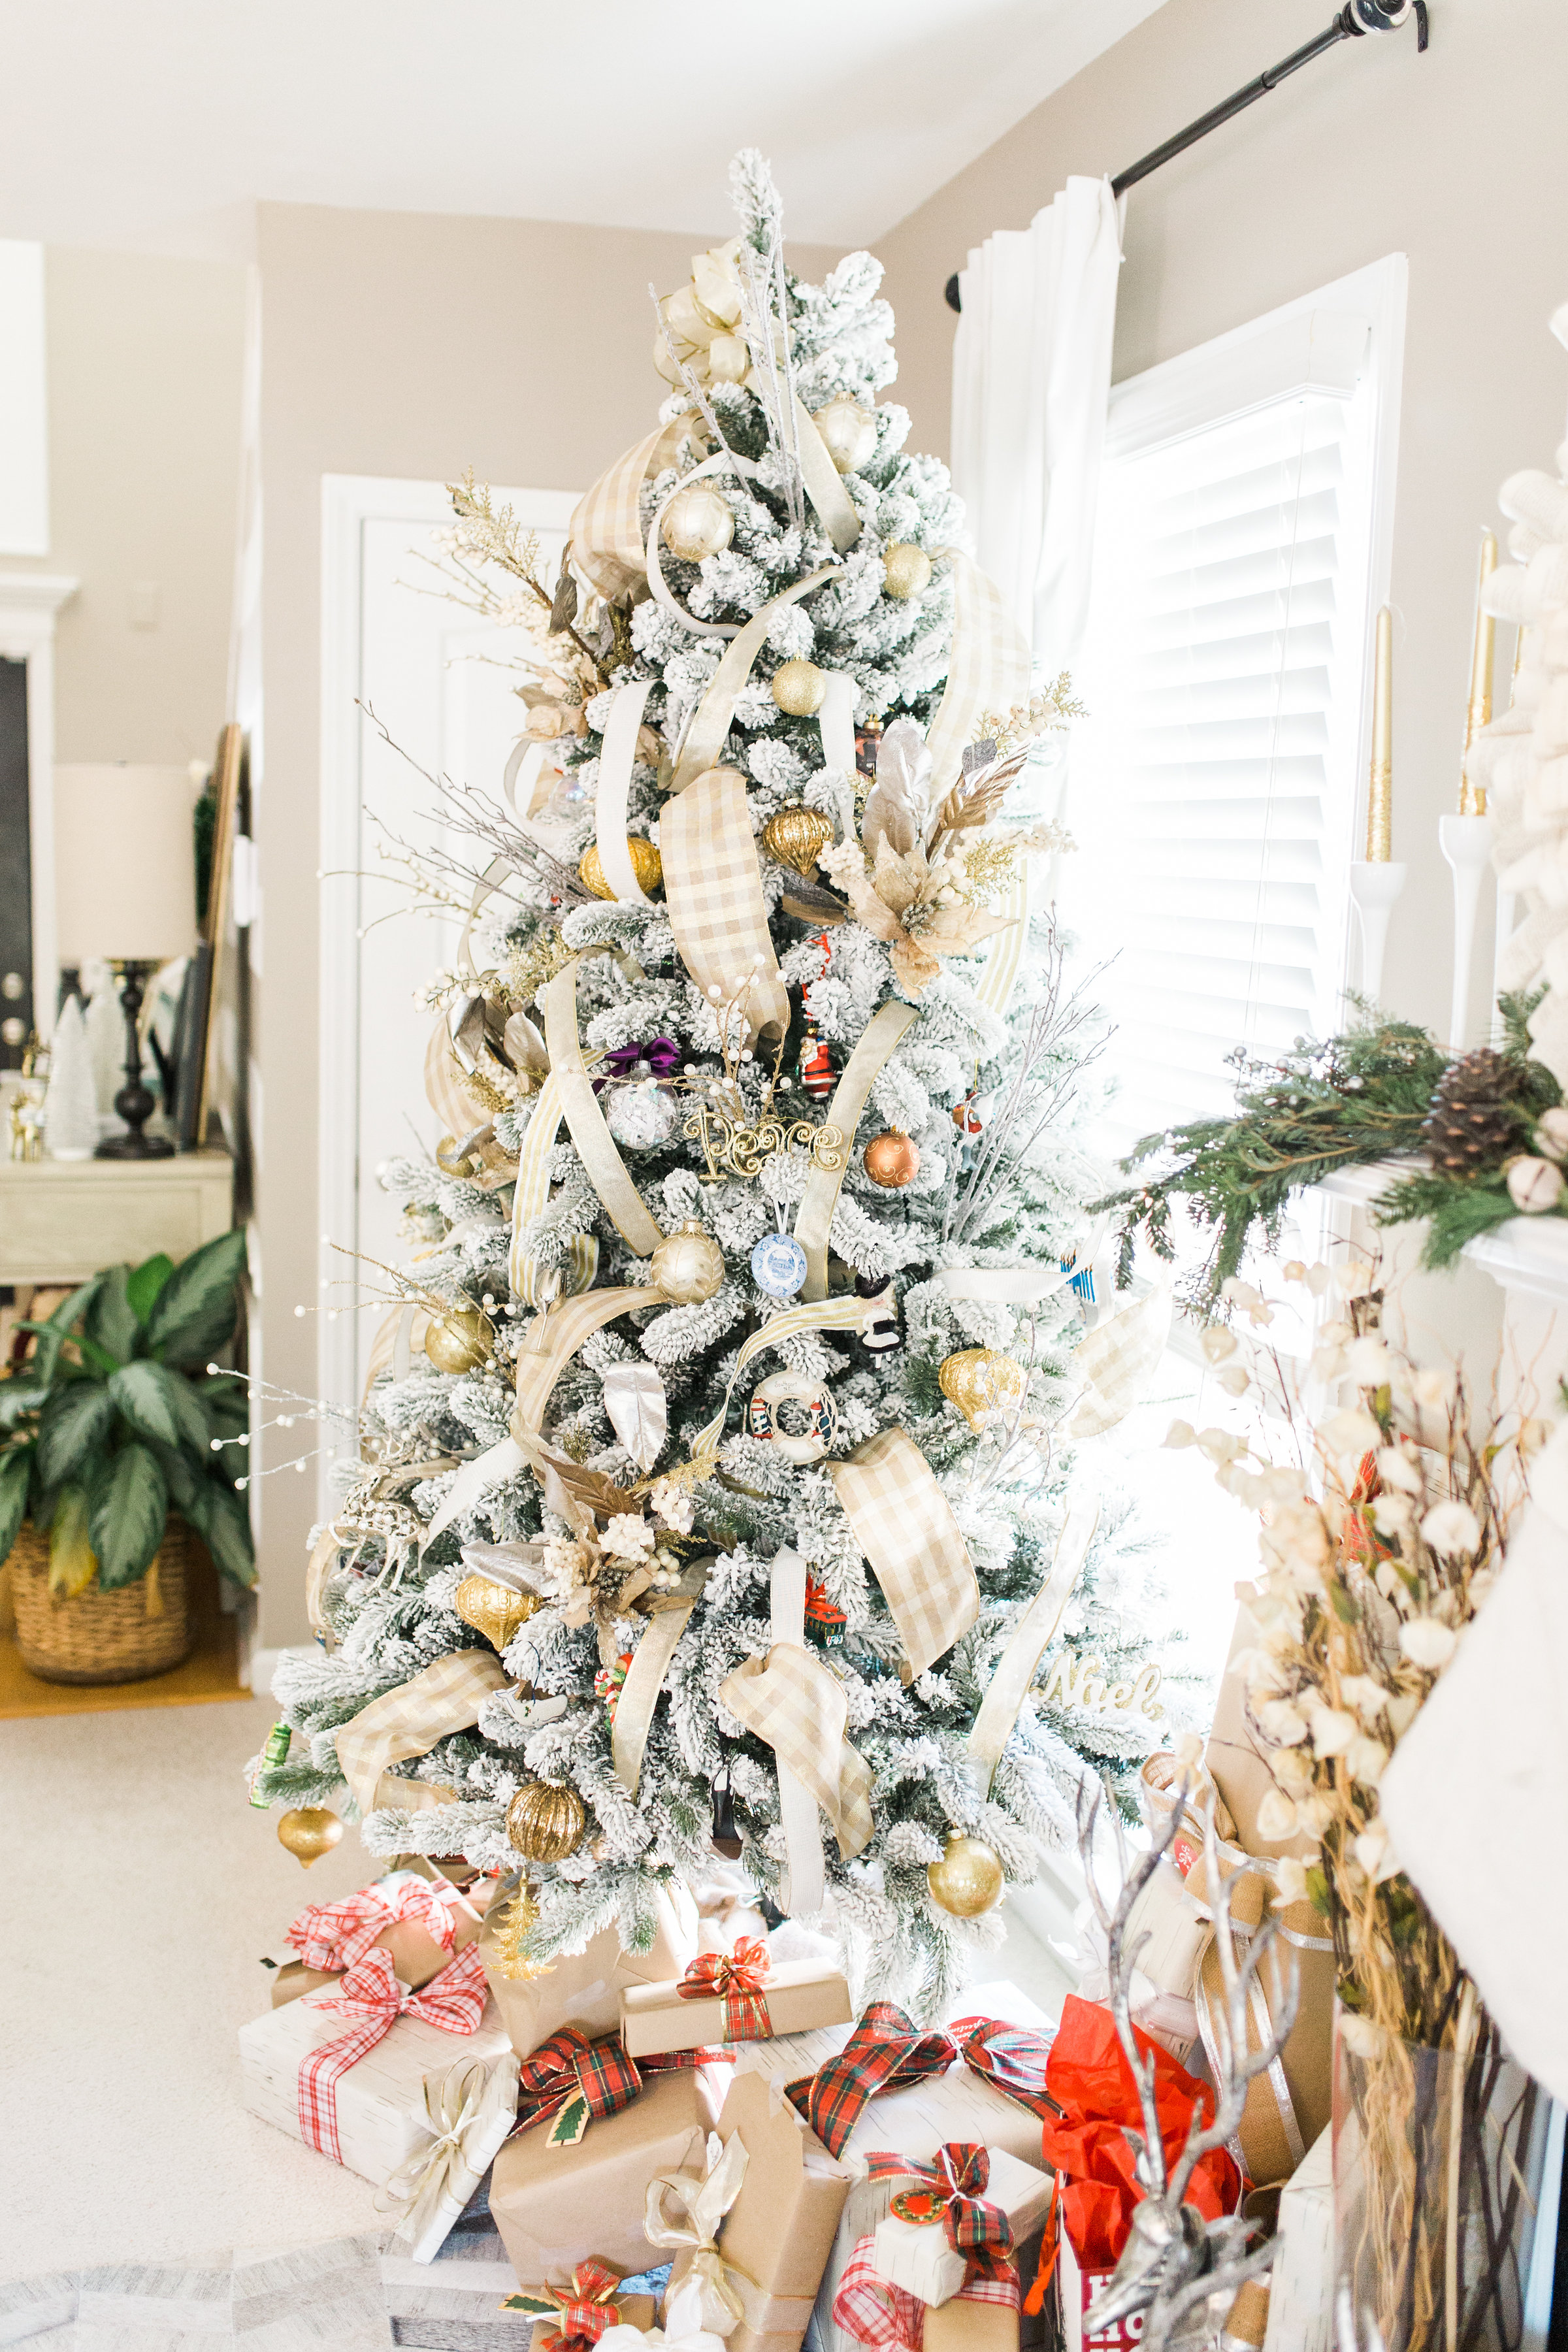 Our Christmas Home Decor by North Carolina style blogger Coffee Beans and Bobby Pins